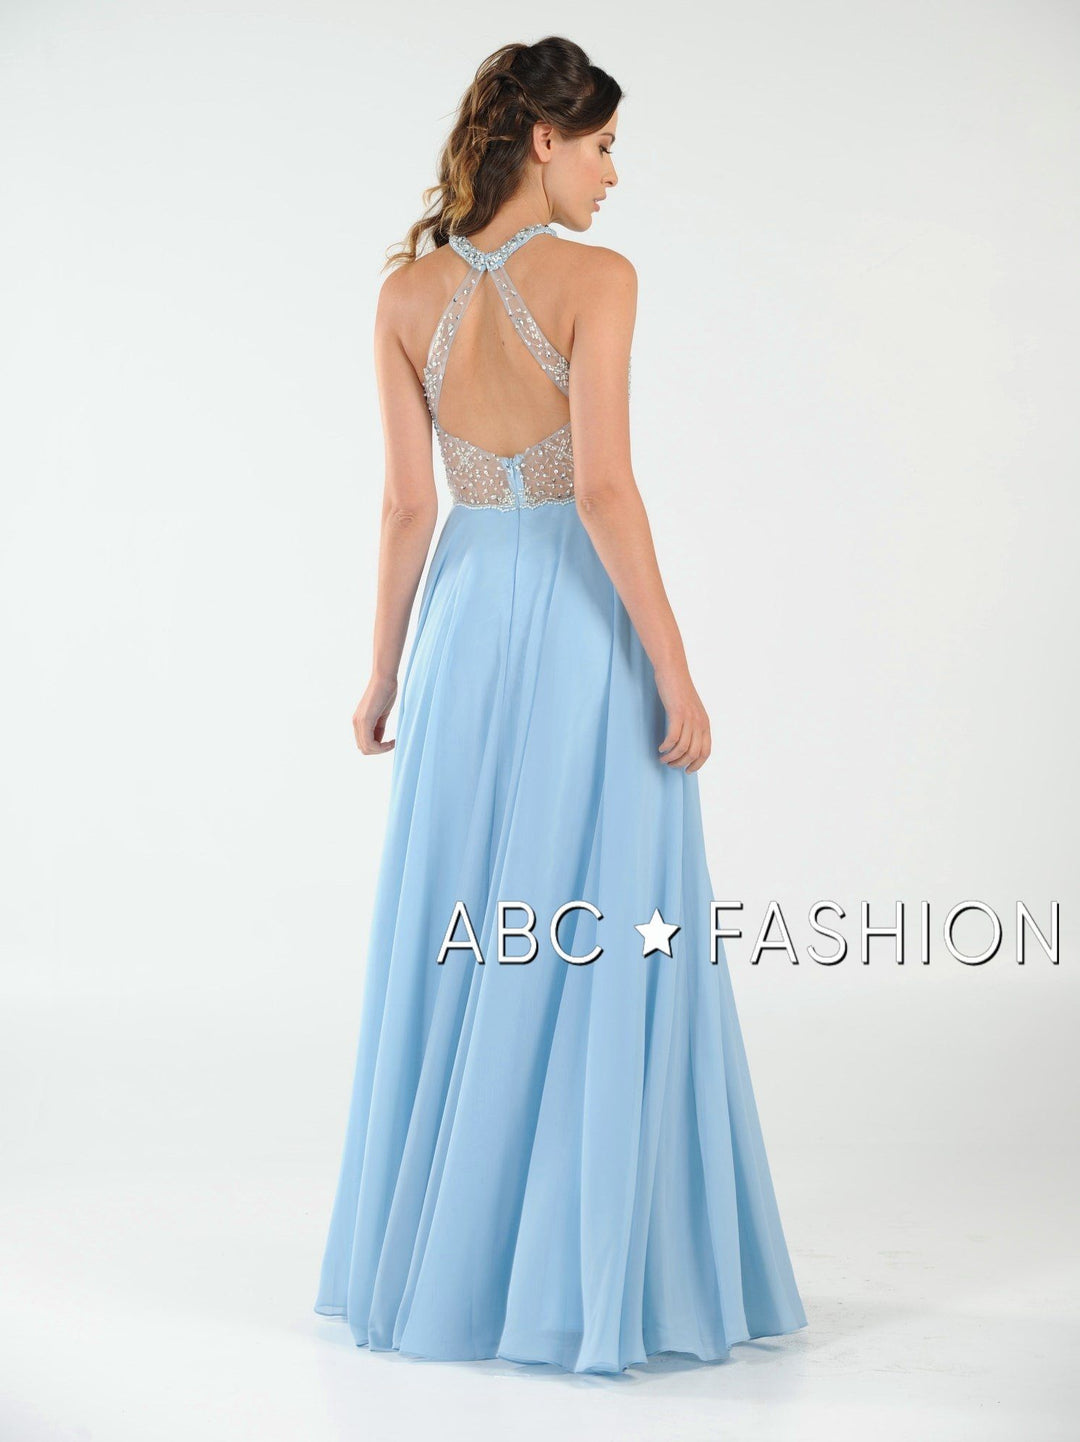 Long Beaded Halter Dress with Sheer Keyhole Bodice by Poly USA 8202-Long Formal Dresses-ABC Fashion